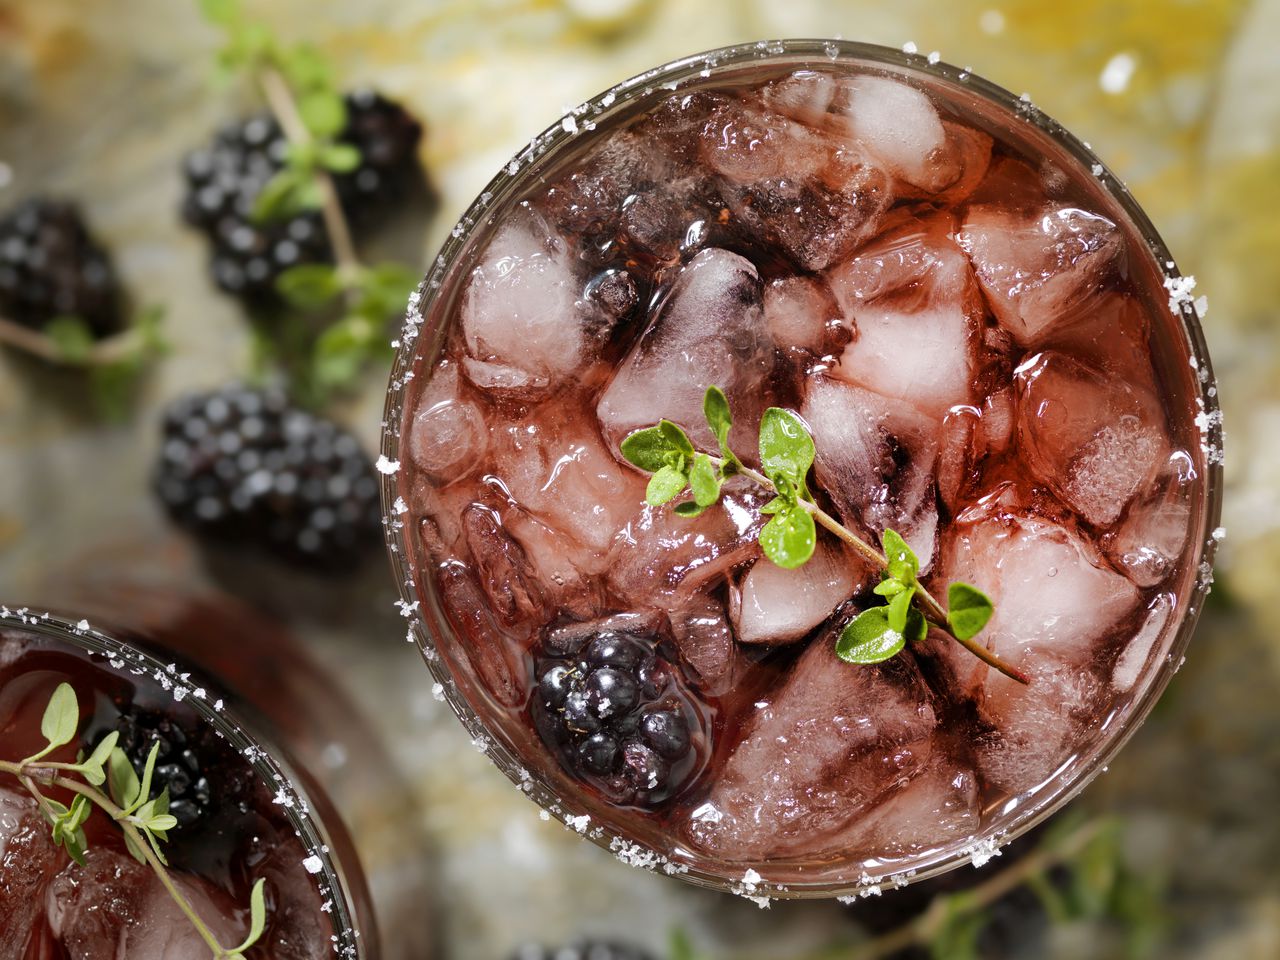 Blackberry and Thyme cocktail with a hint of lemon and lime